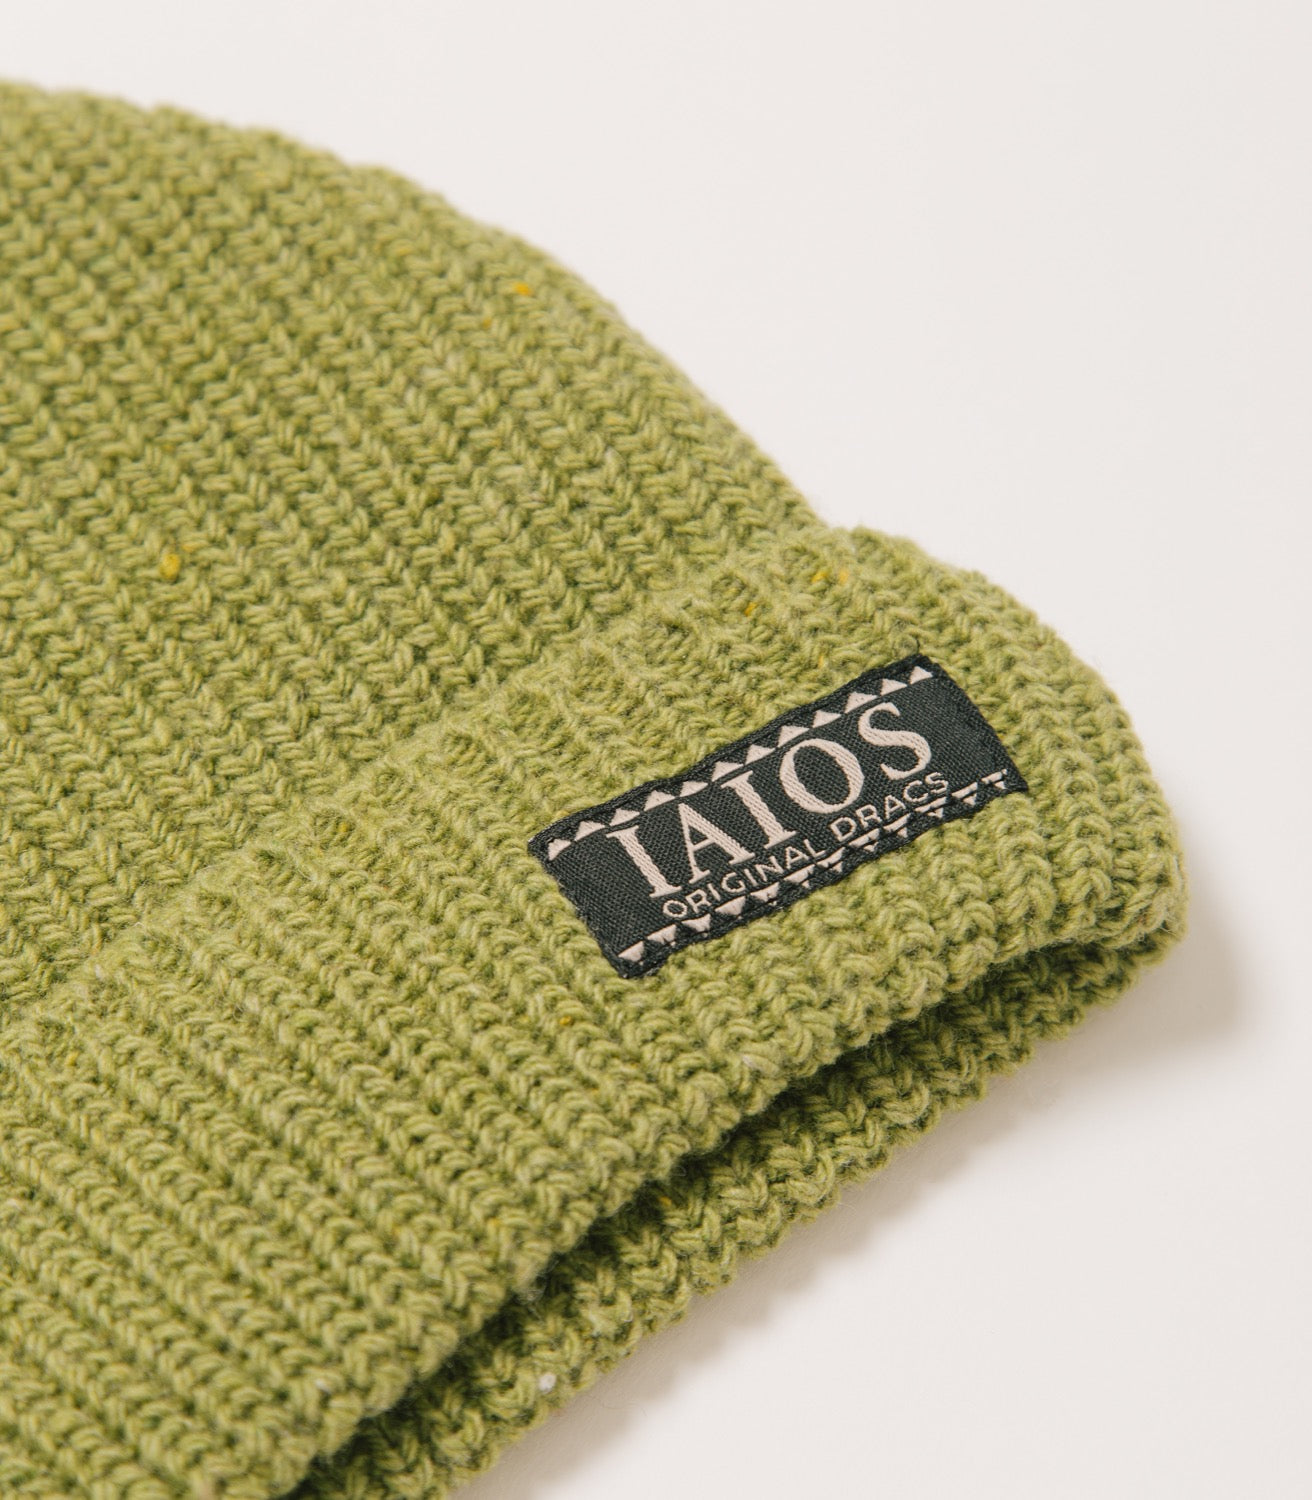 Detail of the label IAIOS on the green cap.